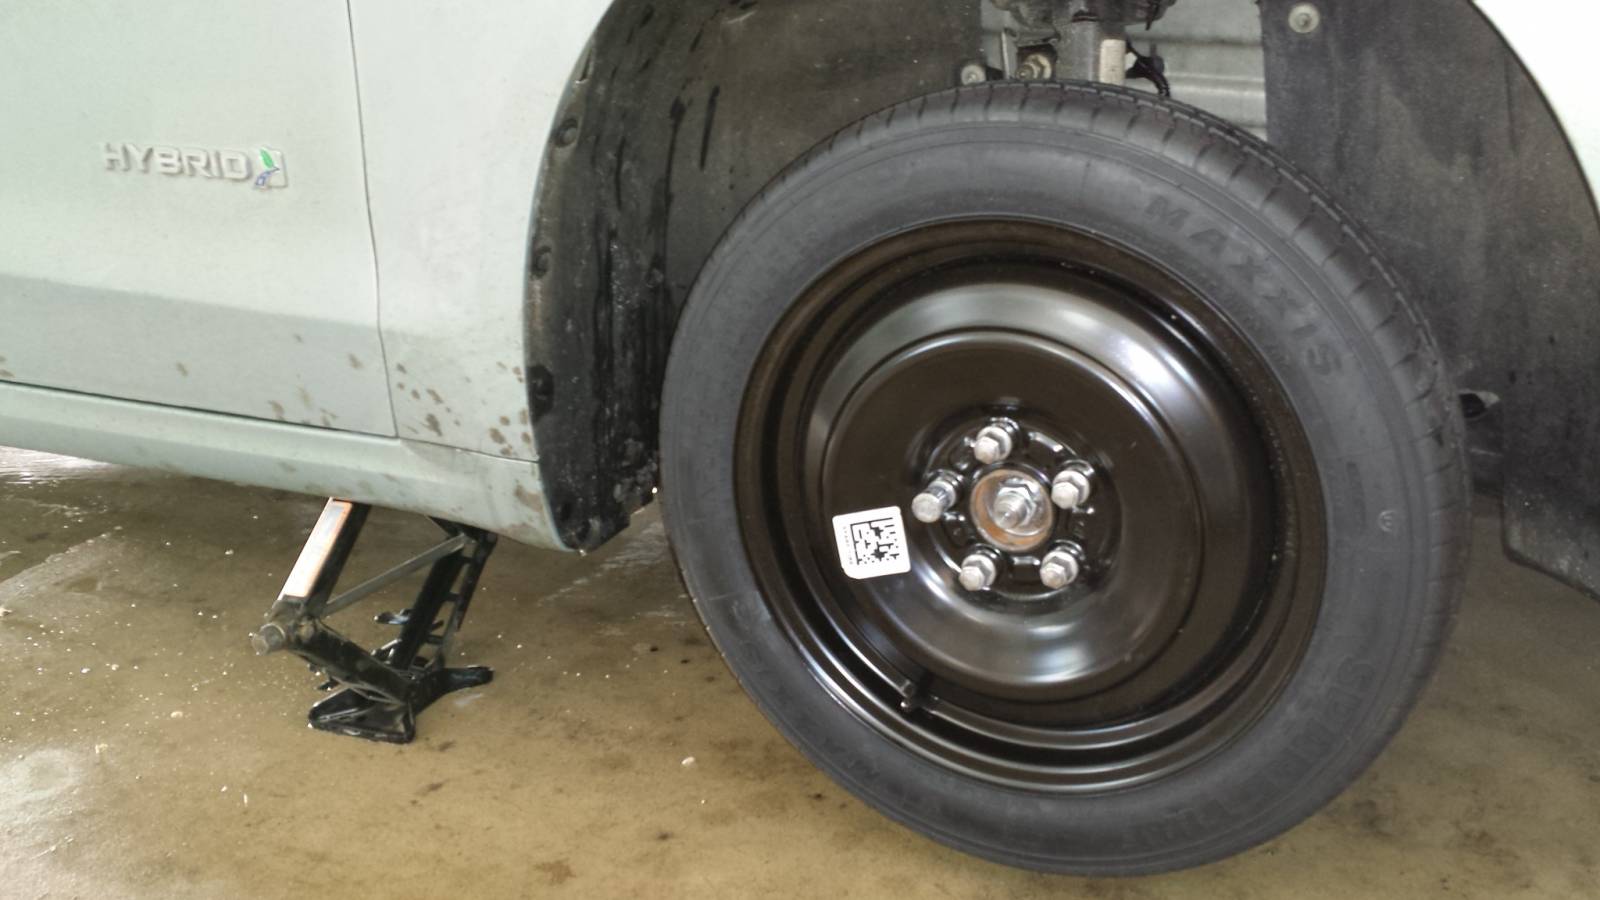 2013 Focus Donut Tire And 2001 Windstar jack